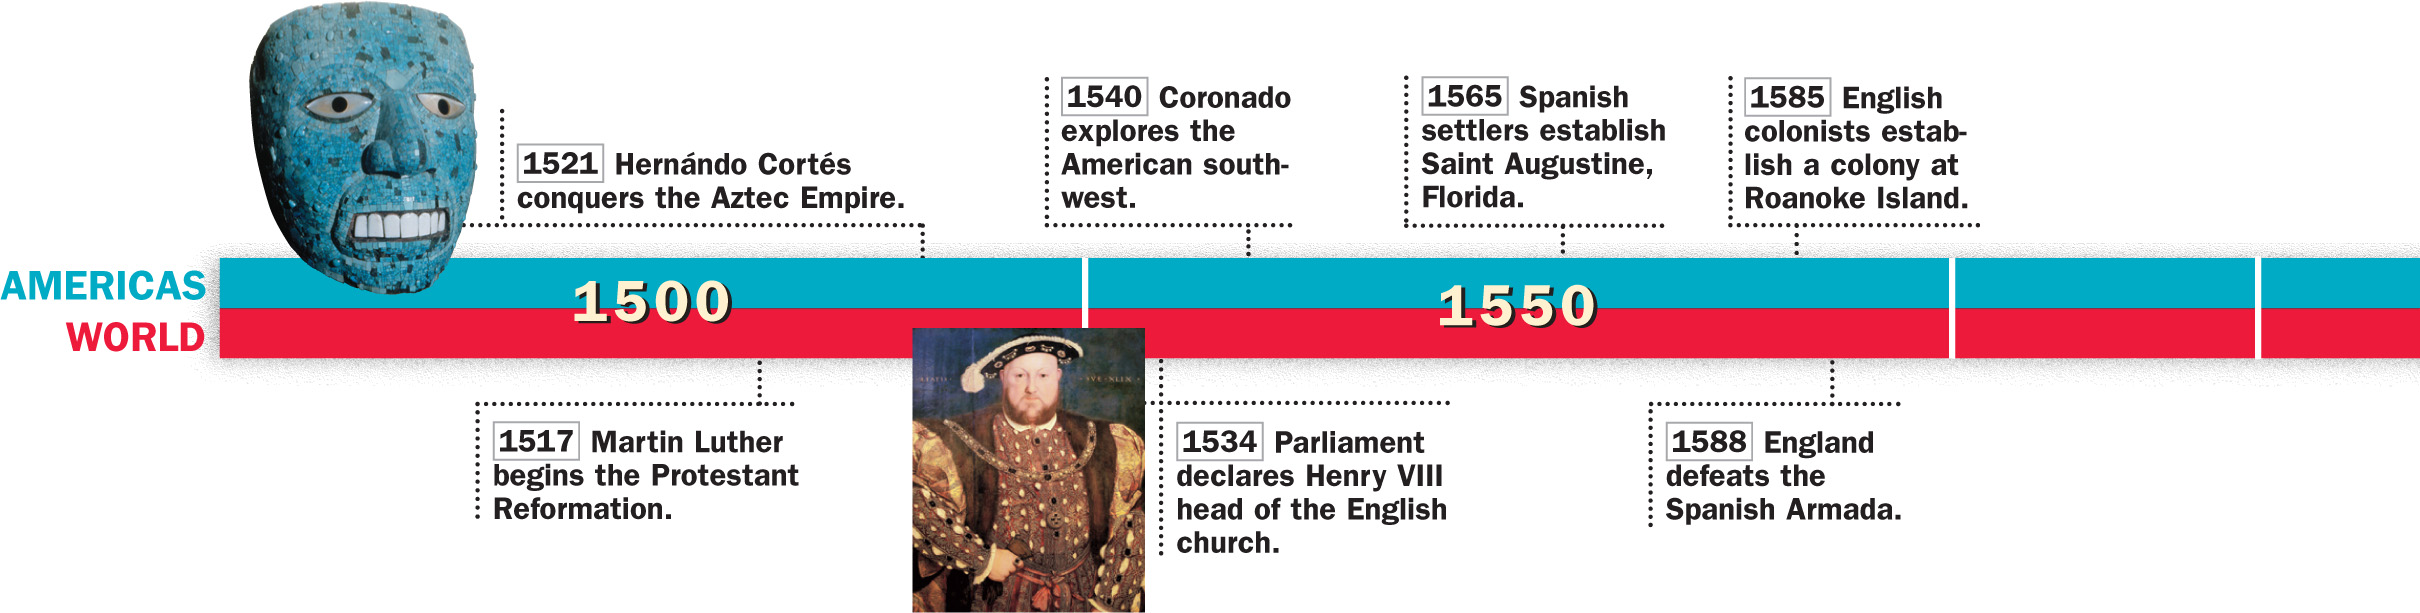 A timeline of historical events from 1500 to 1700 in both the Americas and the world